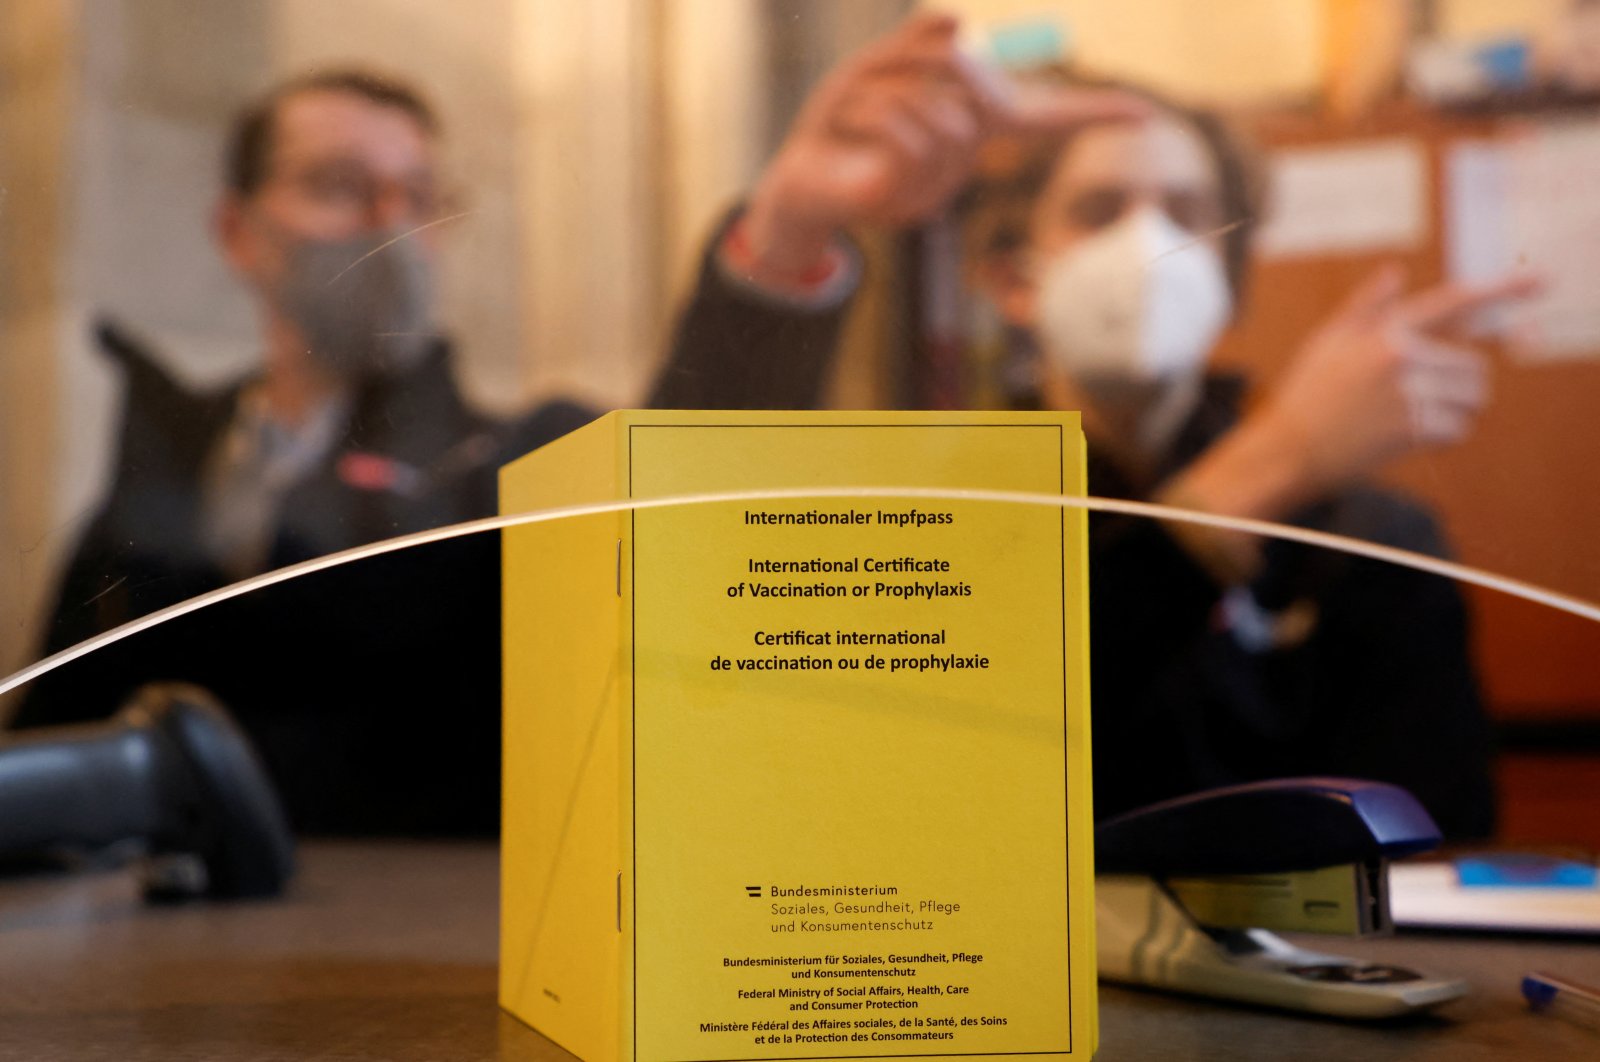 Vaccination passes are seen at a vaccination center in St. Stephen&#039;s Cathedral in Vienna, Austria, Feb. 5, 2022. (REUTERS/Leonhard Foeger)